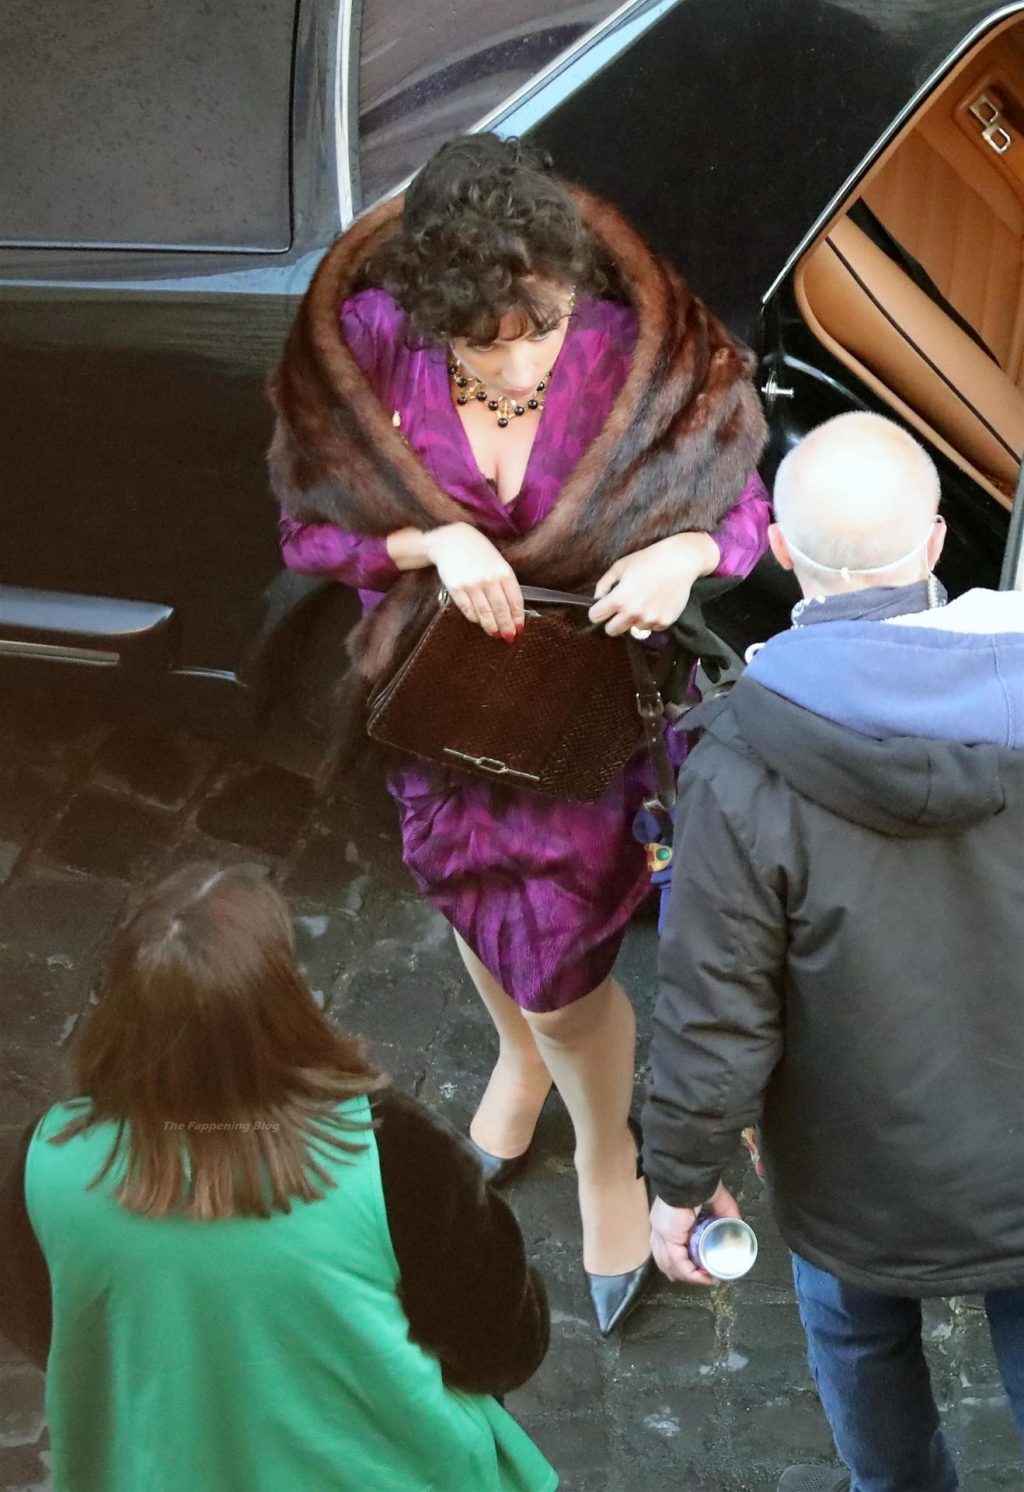 Lady Gaga is in Character Spotted on Set Shooting a Scene From the New Movie “House of Gucci” (46 Photos)